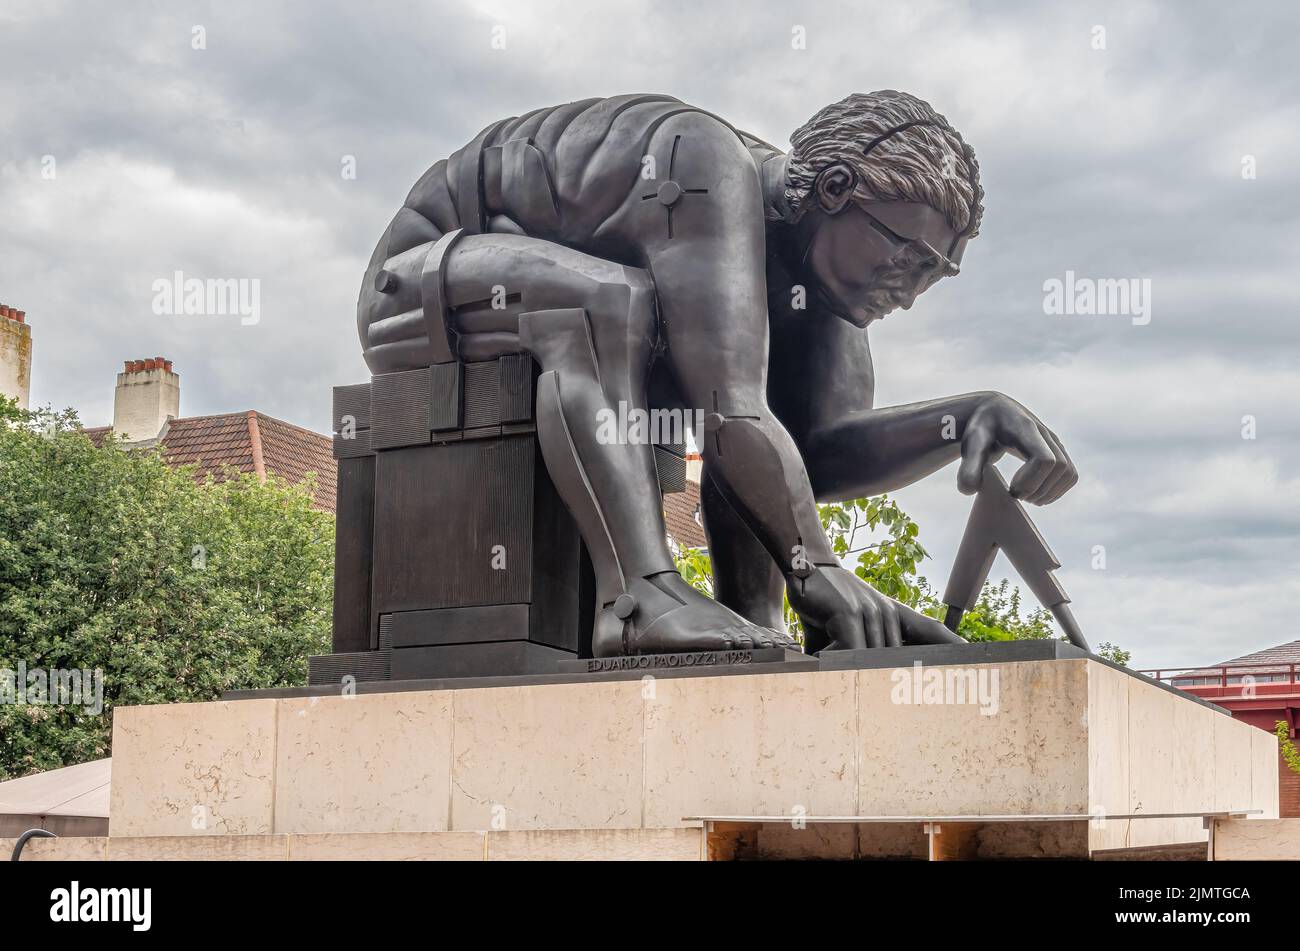 London, Great Britain - July 3, 2022: Closeup of gray Newton Statue on pedestal in front yard of British Library and Knowledge Center under gray cloud Stock Photo